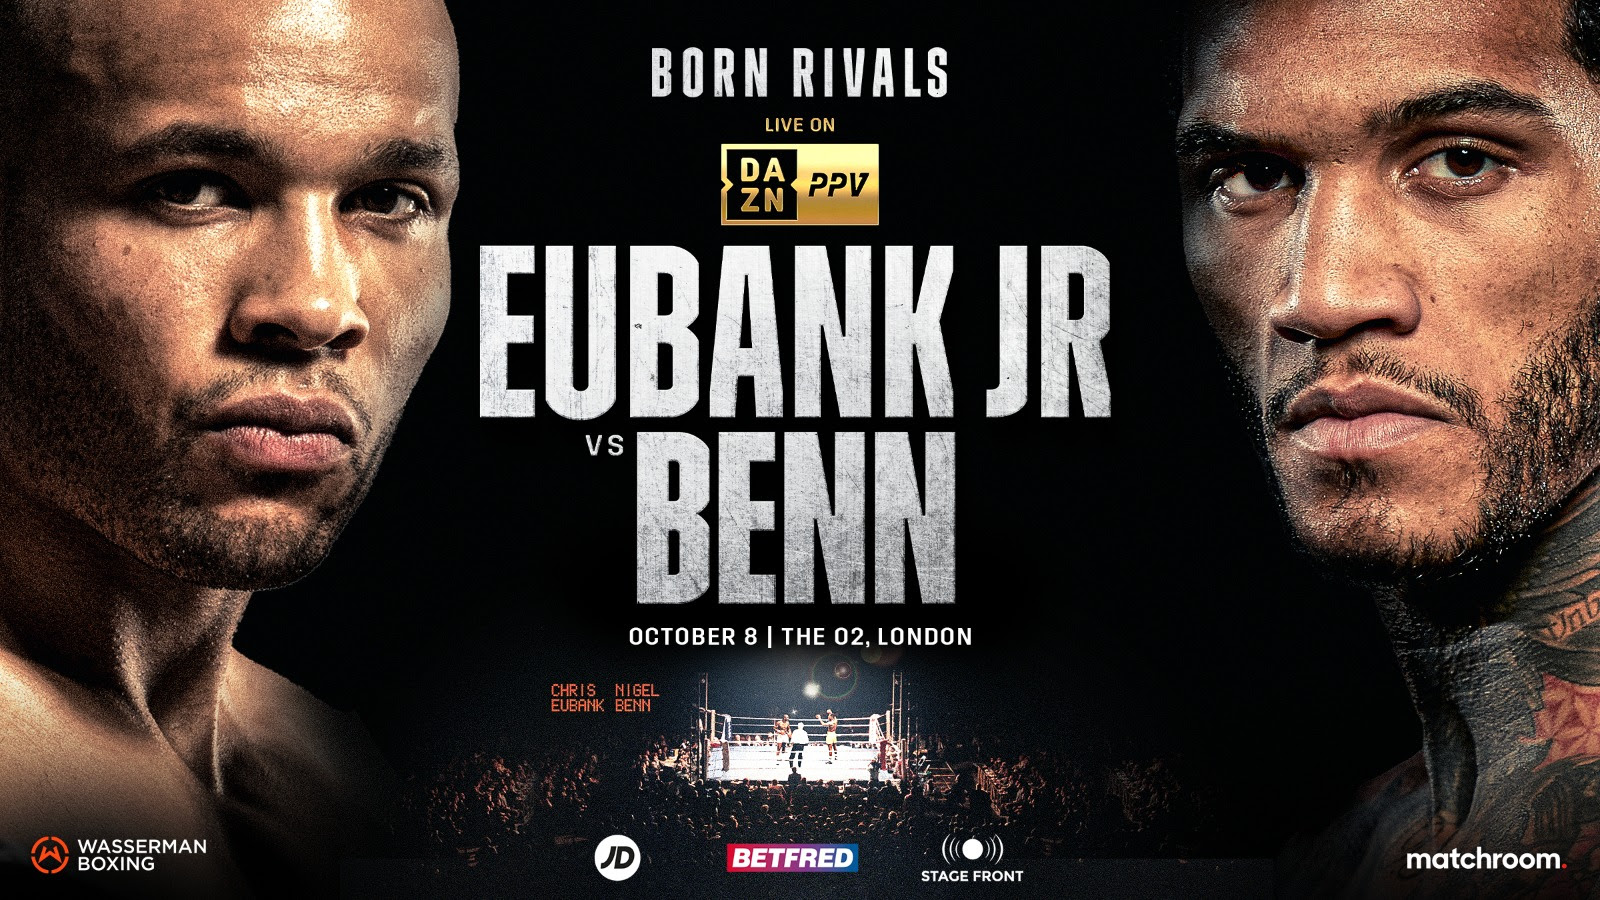 If Chris Eubank Jr is above 158.5, fight is off against Conor Benn